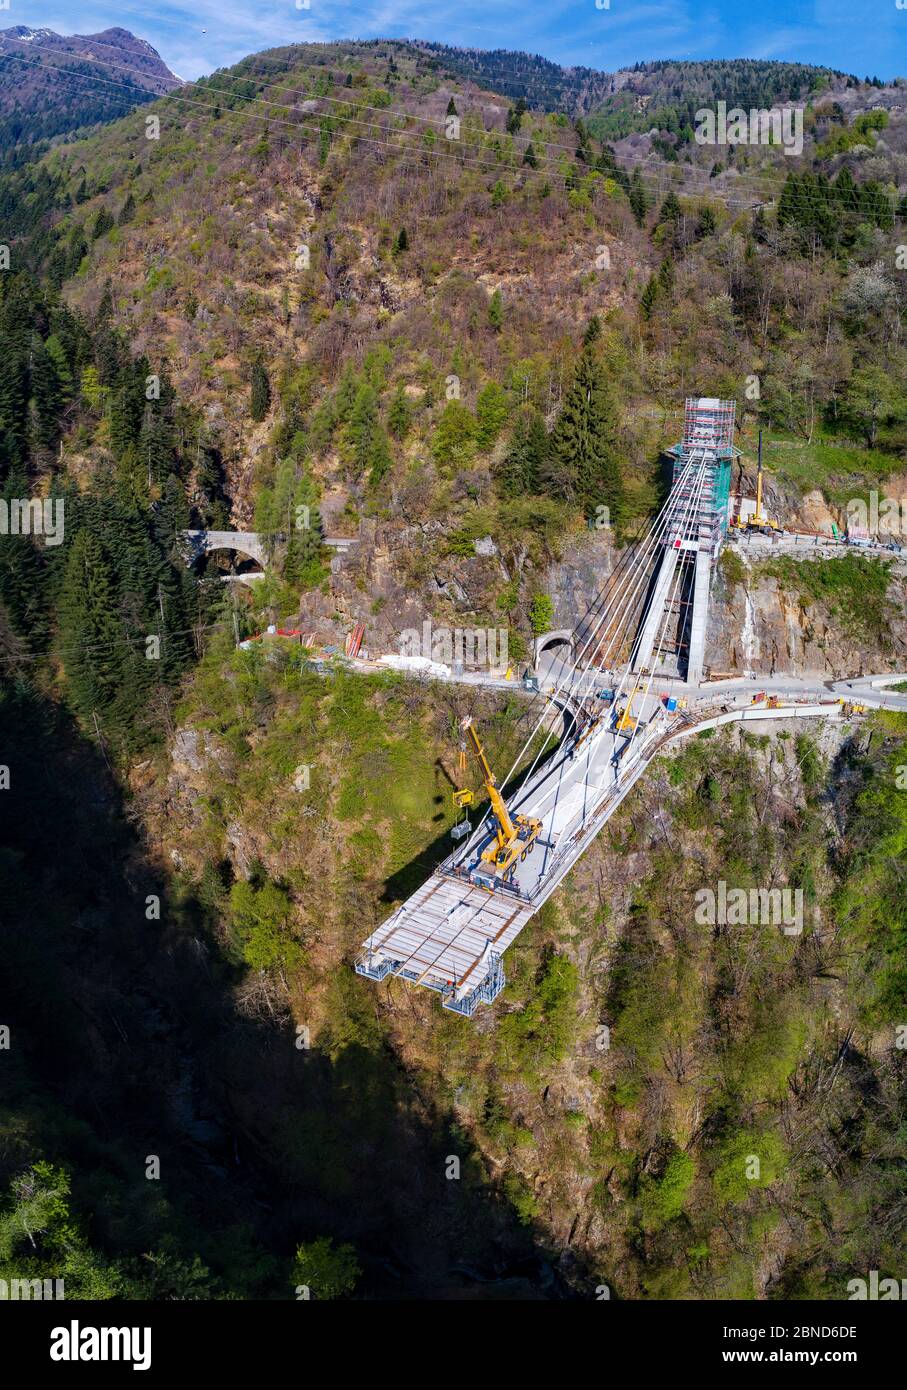 Valgerola - Valtellina (IT) - Panoramic aerial view of the cable-stayed bridge under construction - 2017 Stock Photo